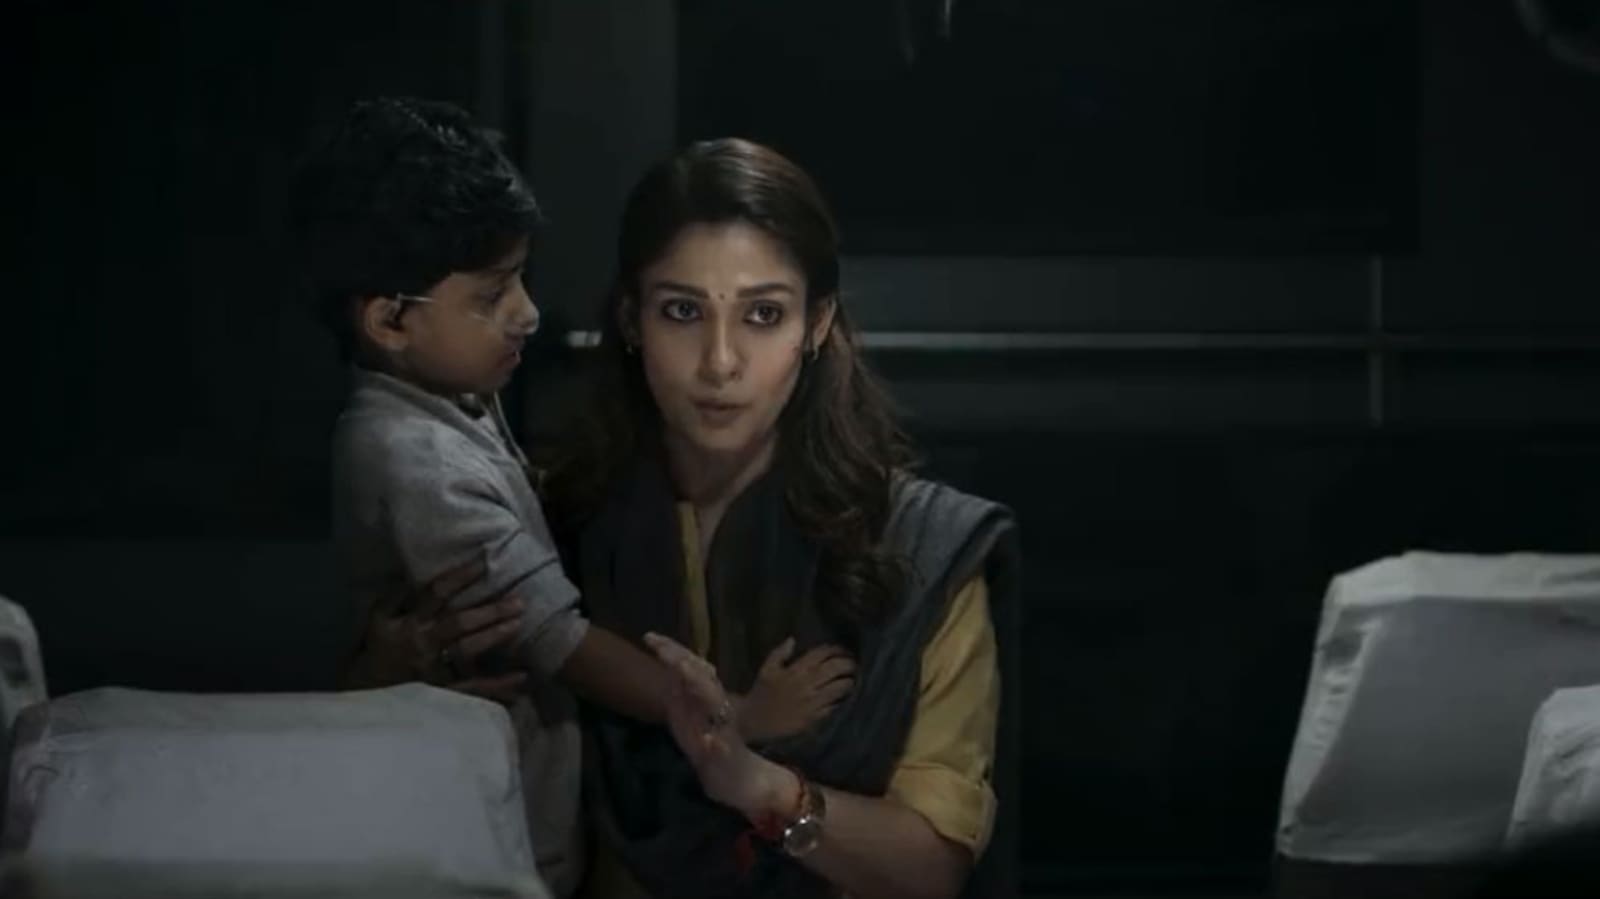 O2 review: Nayanthara’s film is a decent survival thriller uplifted by good performances and cinematography